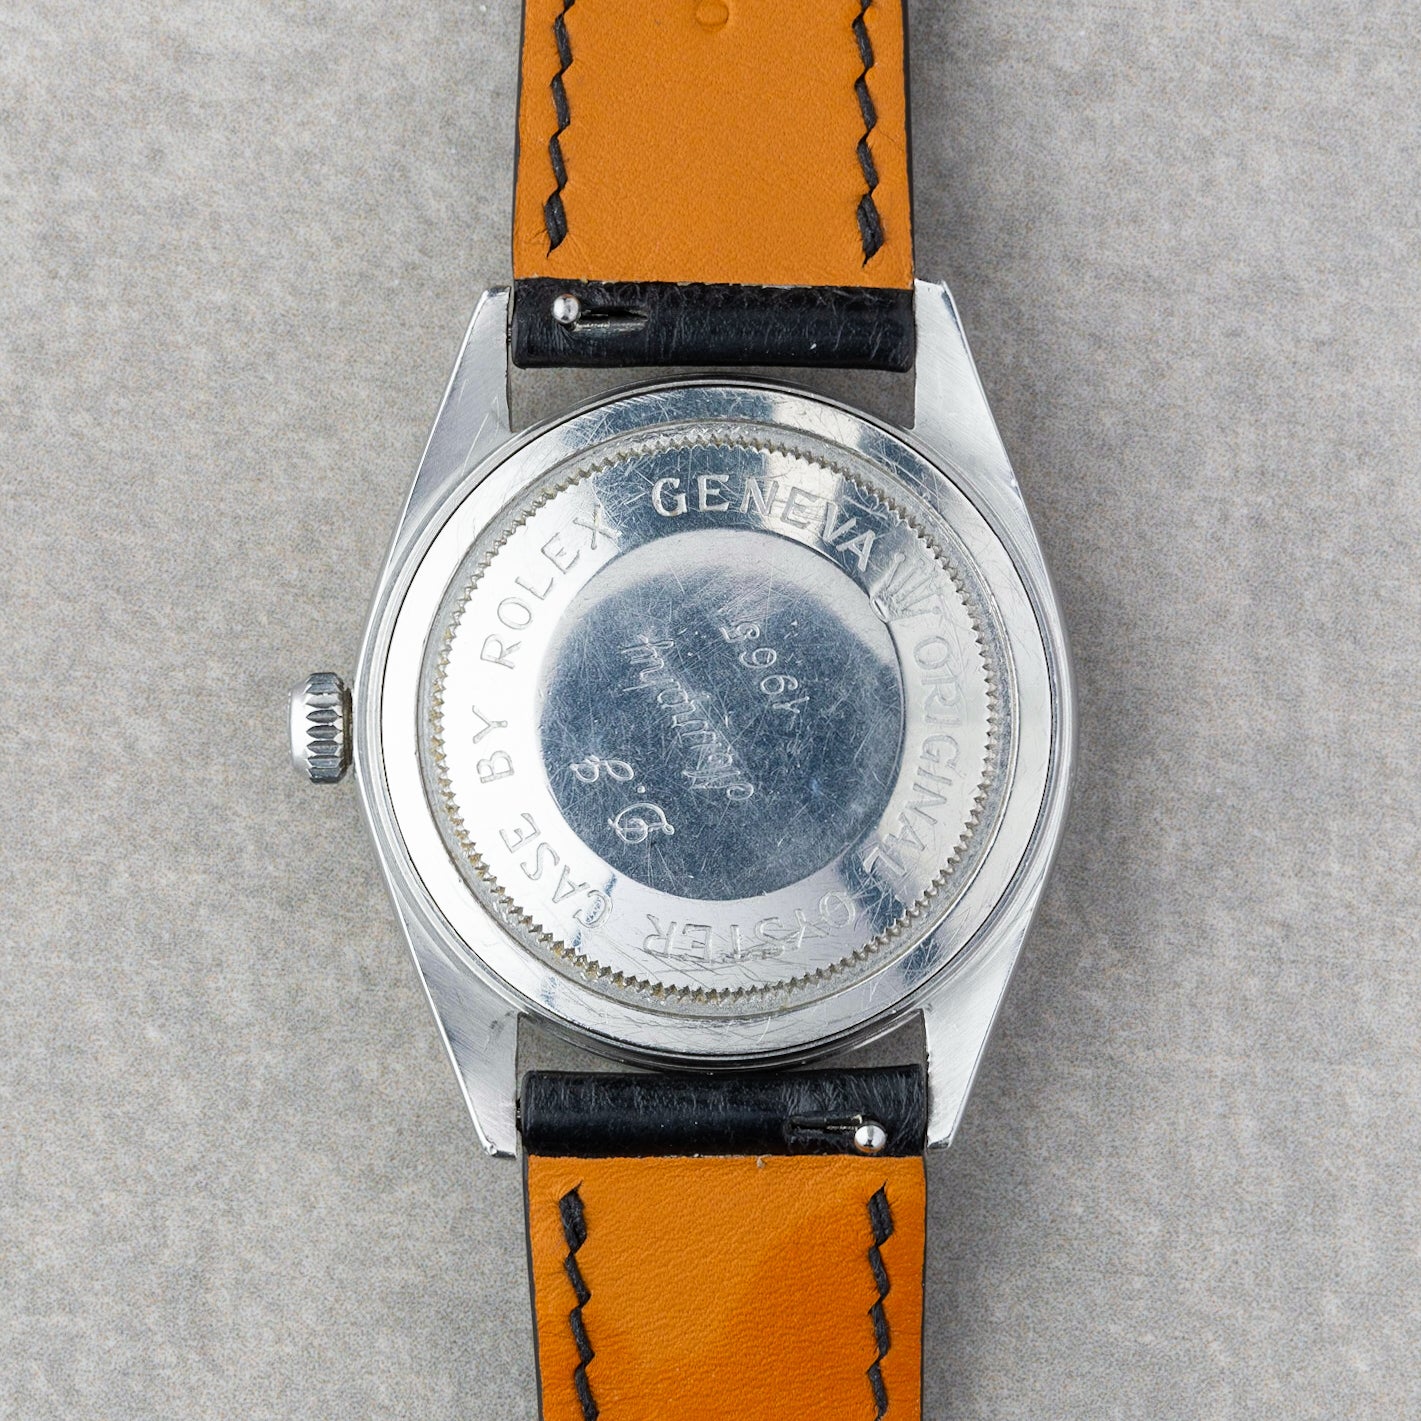 1964 Tudor Oyster-Prince “Small Rose” Ref. 7965